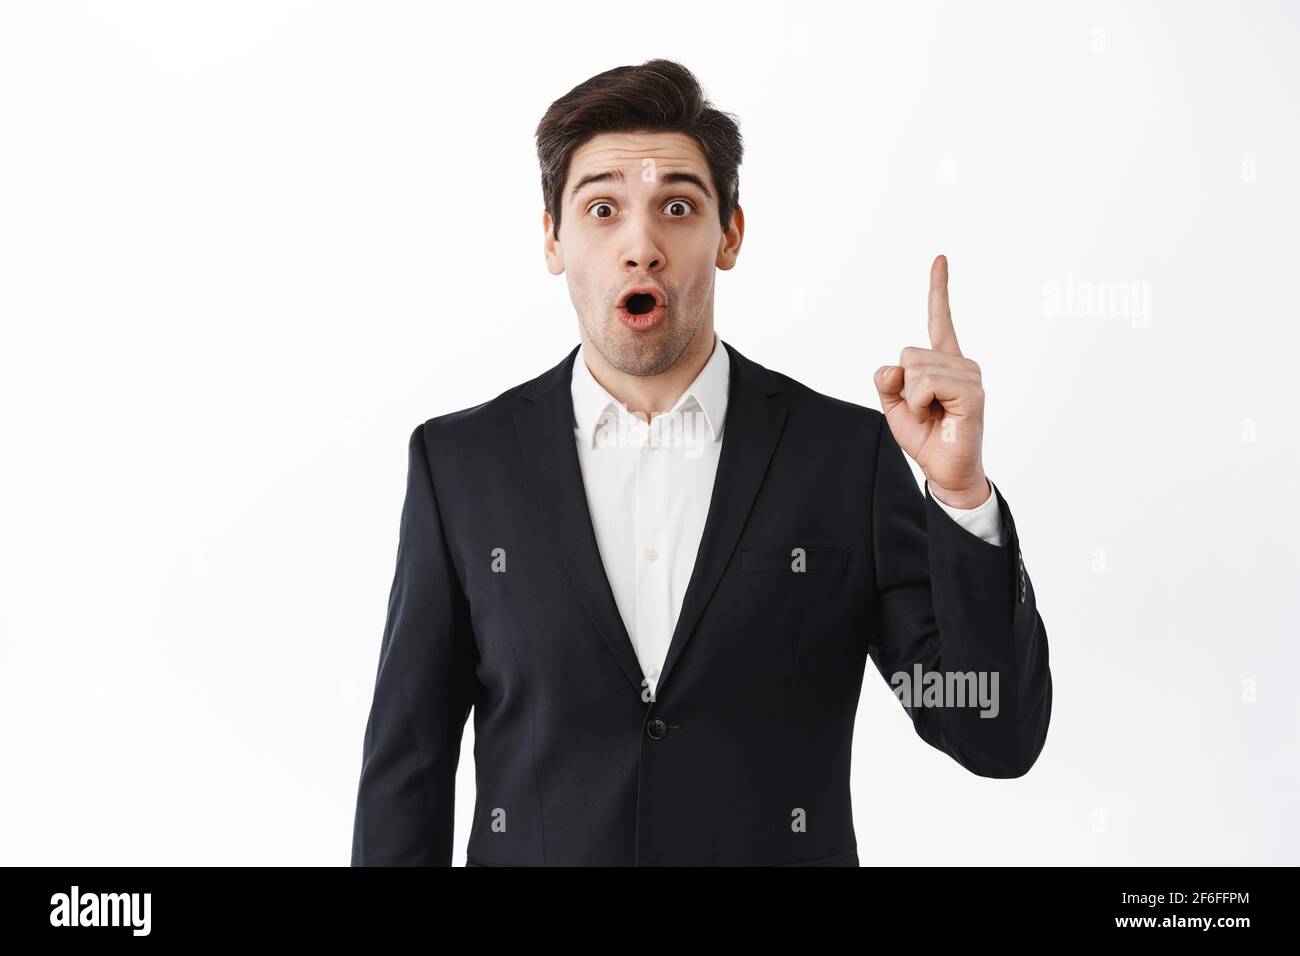 Surprised businessman pointing finger up and gasping amazed, say wow, stare excited at camera, standing in black suit against white studio background Stock Photo